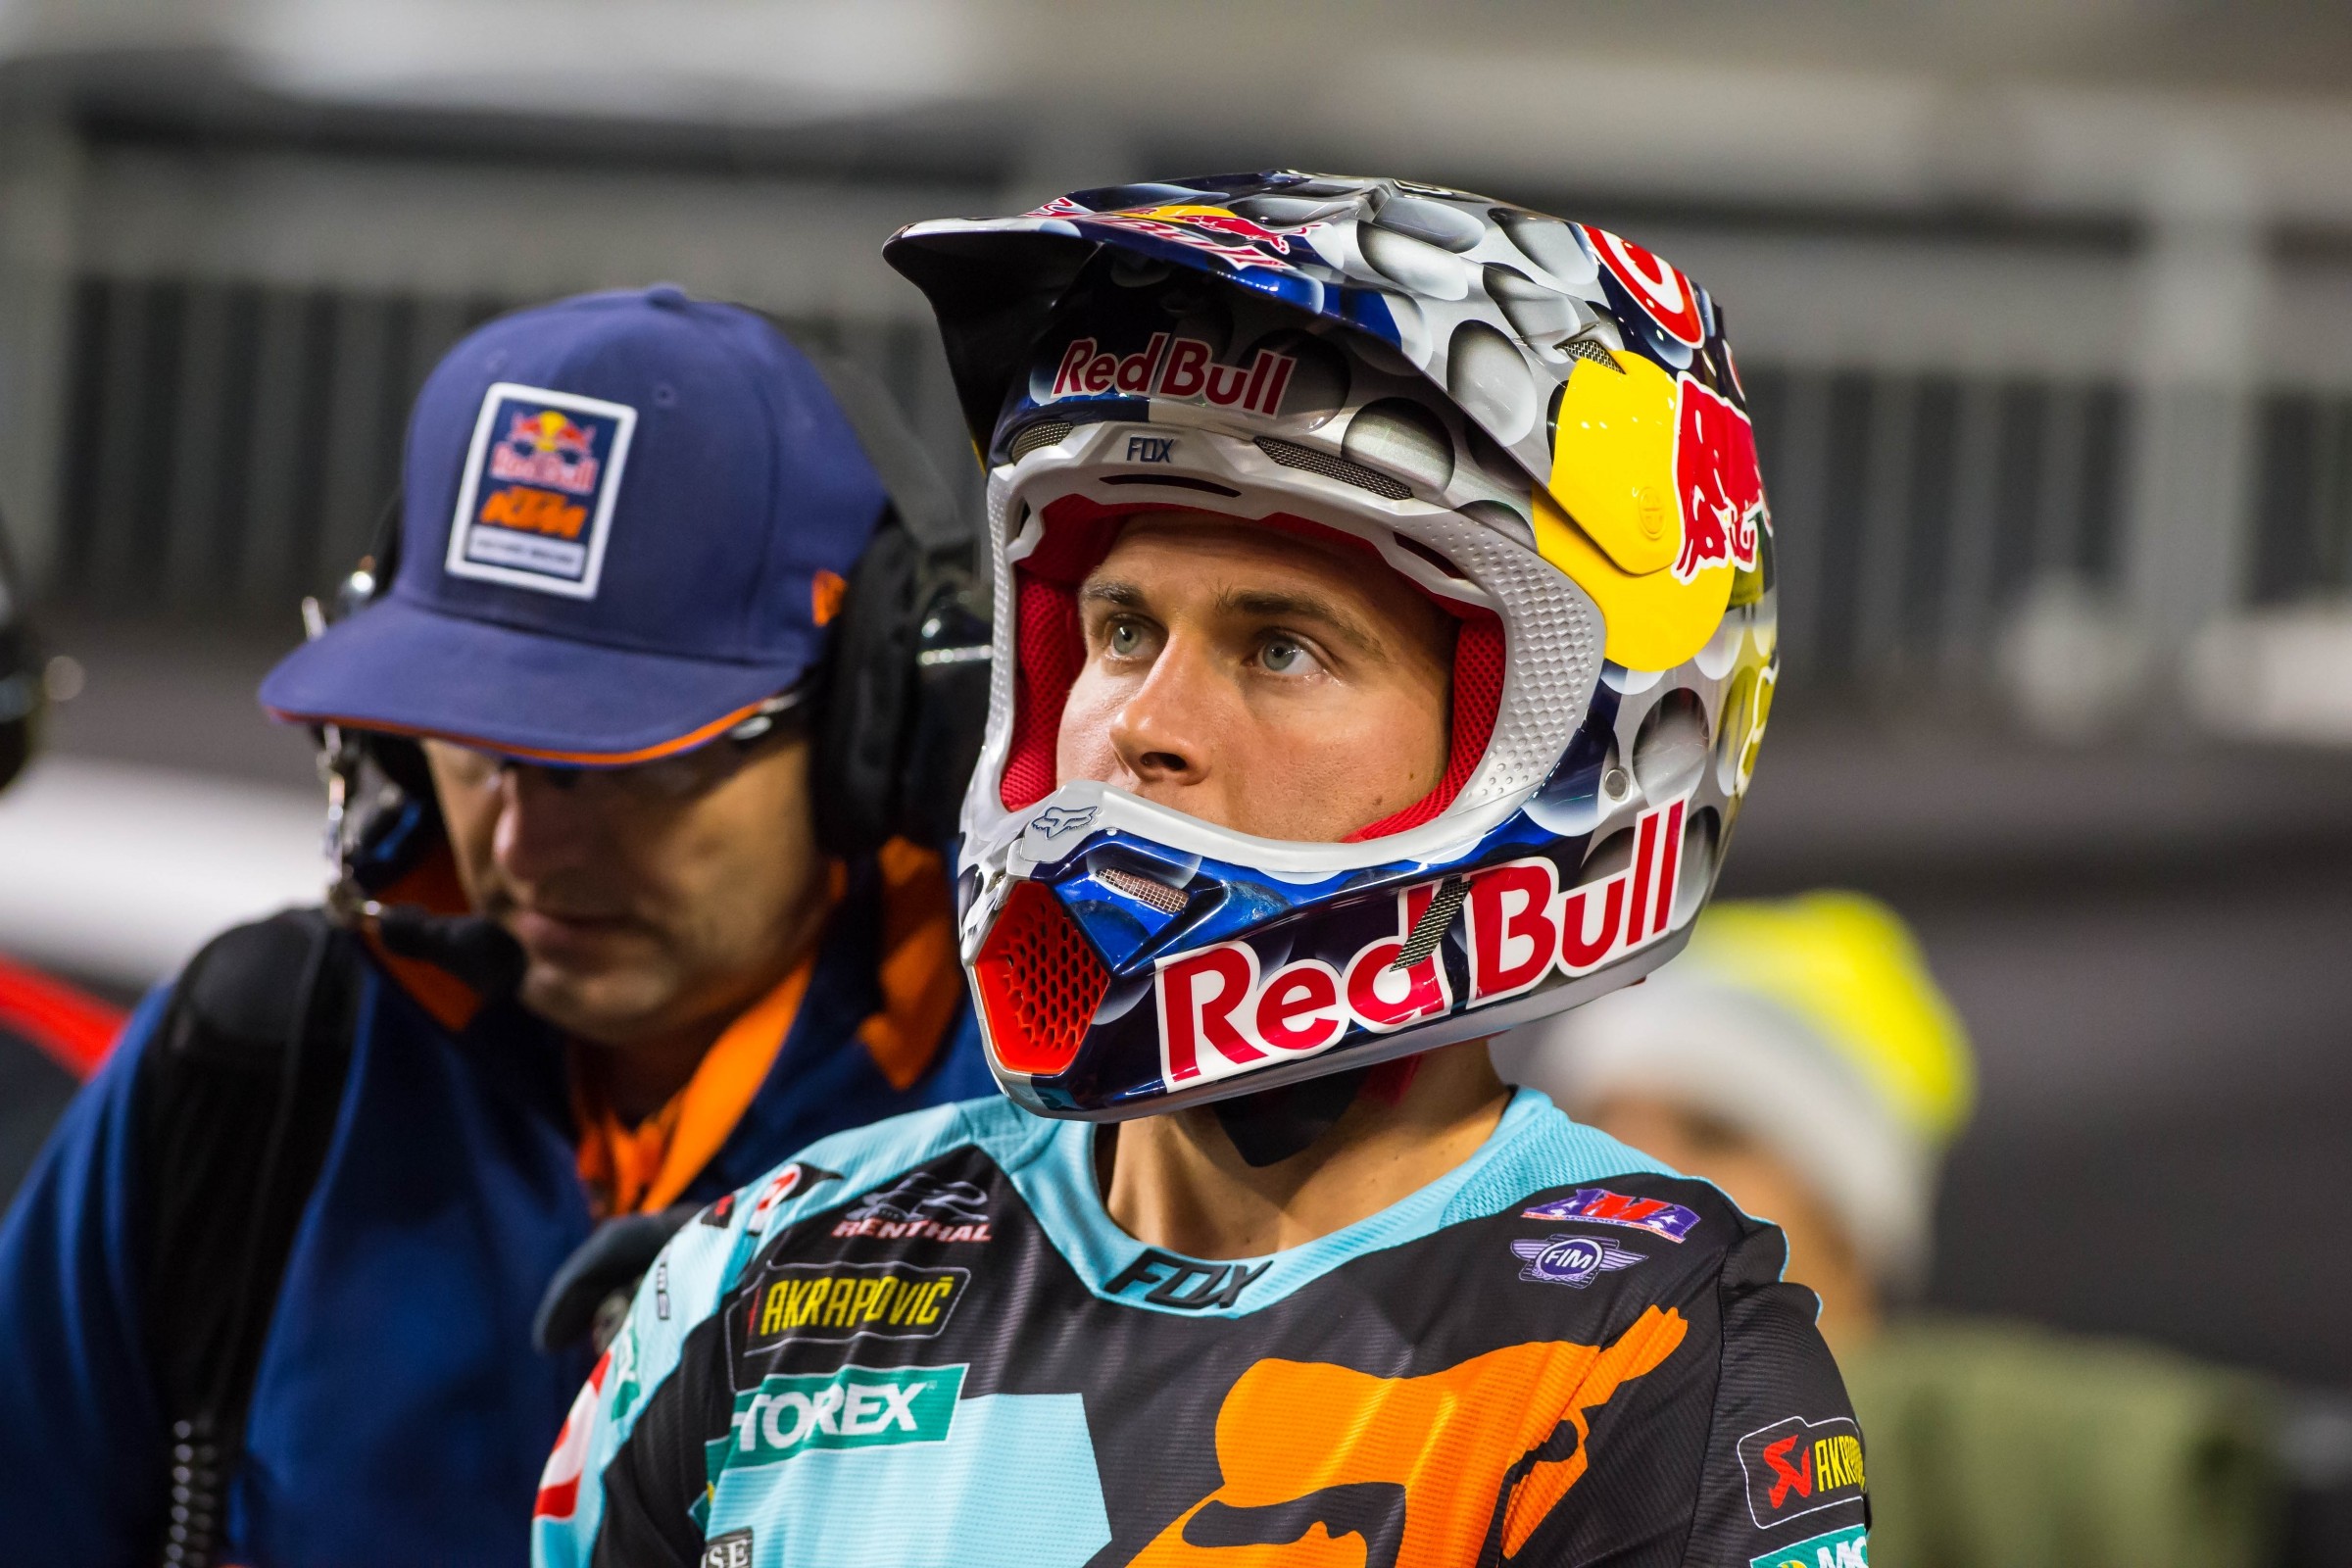 Ryan Dungey Nominated For An ESPY | Vote Now - Racer X Online2400 x 1600